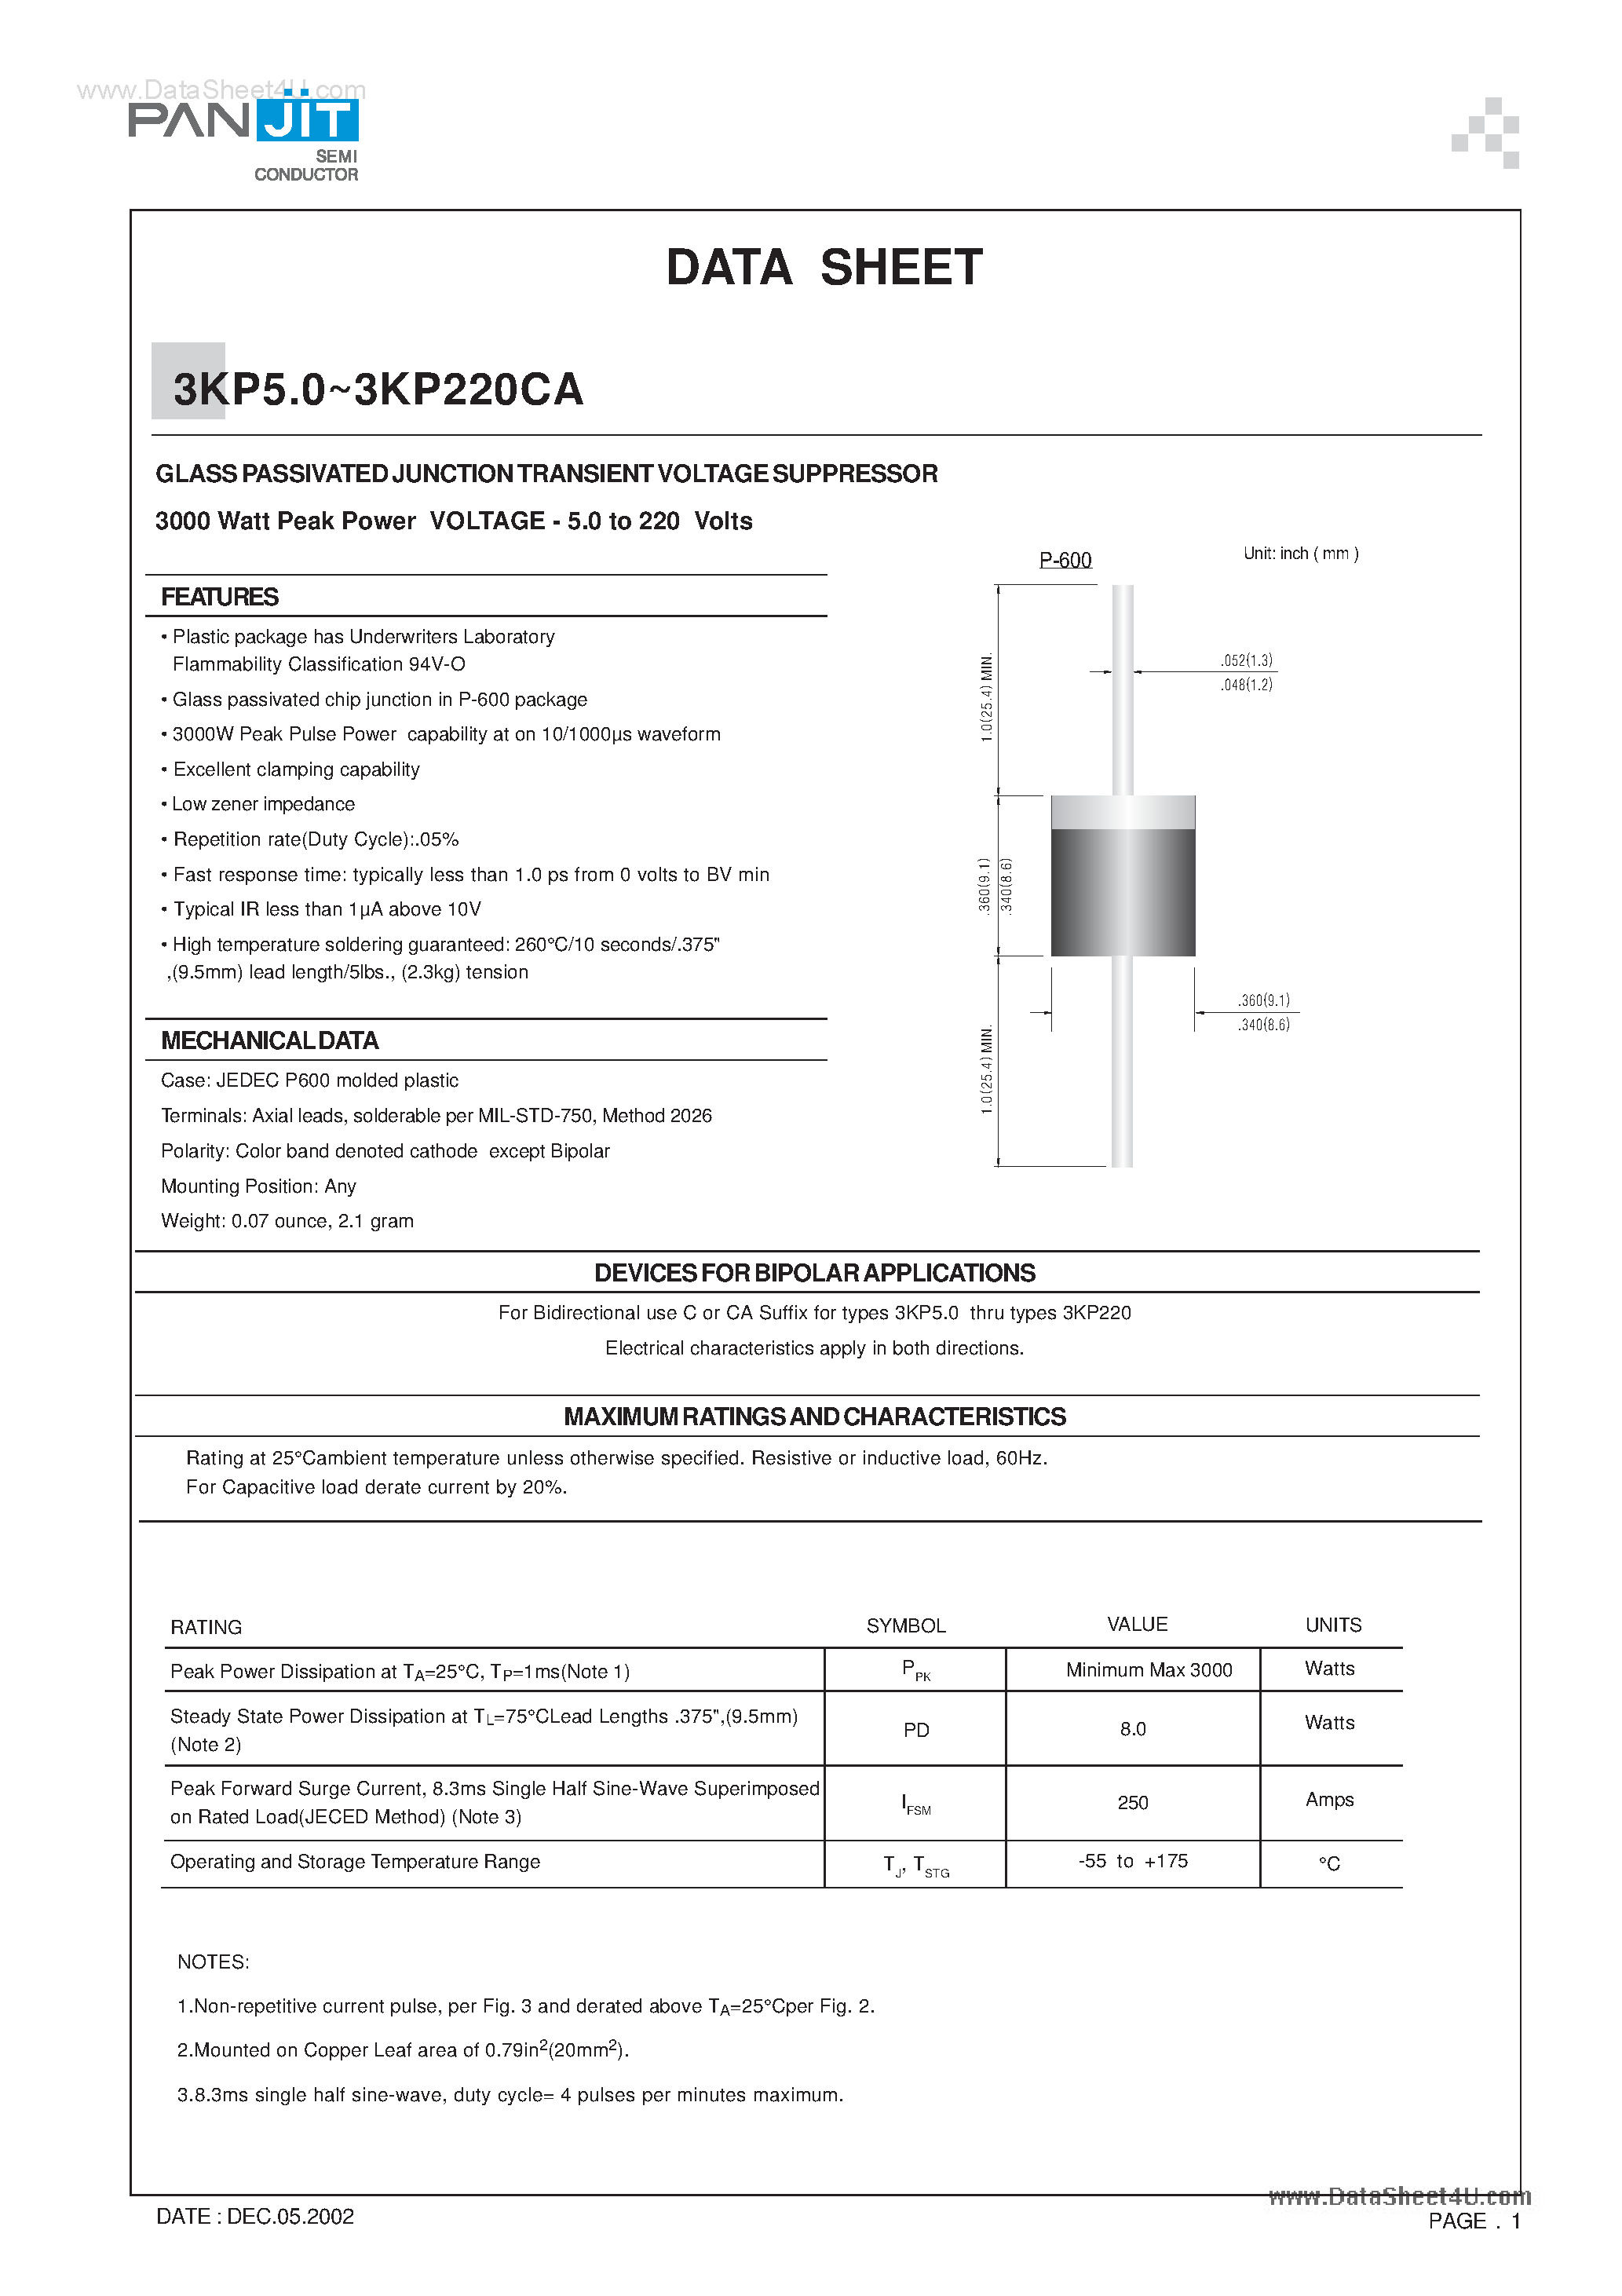 Даташит 3KP10 - (3KP5.0 - 3KP220CA) GLASS PASSIVATED JUNCTION TRANSIENT VOLTAGE SUPPRESSOR страница 1